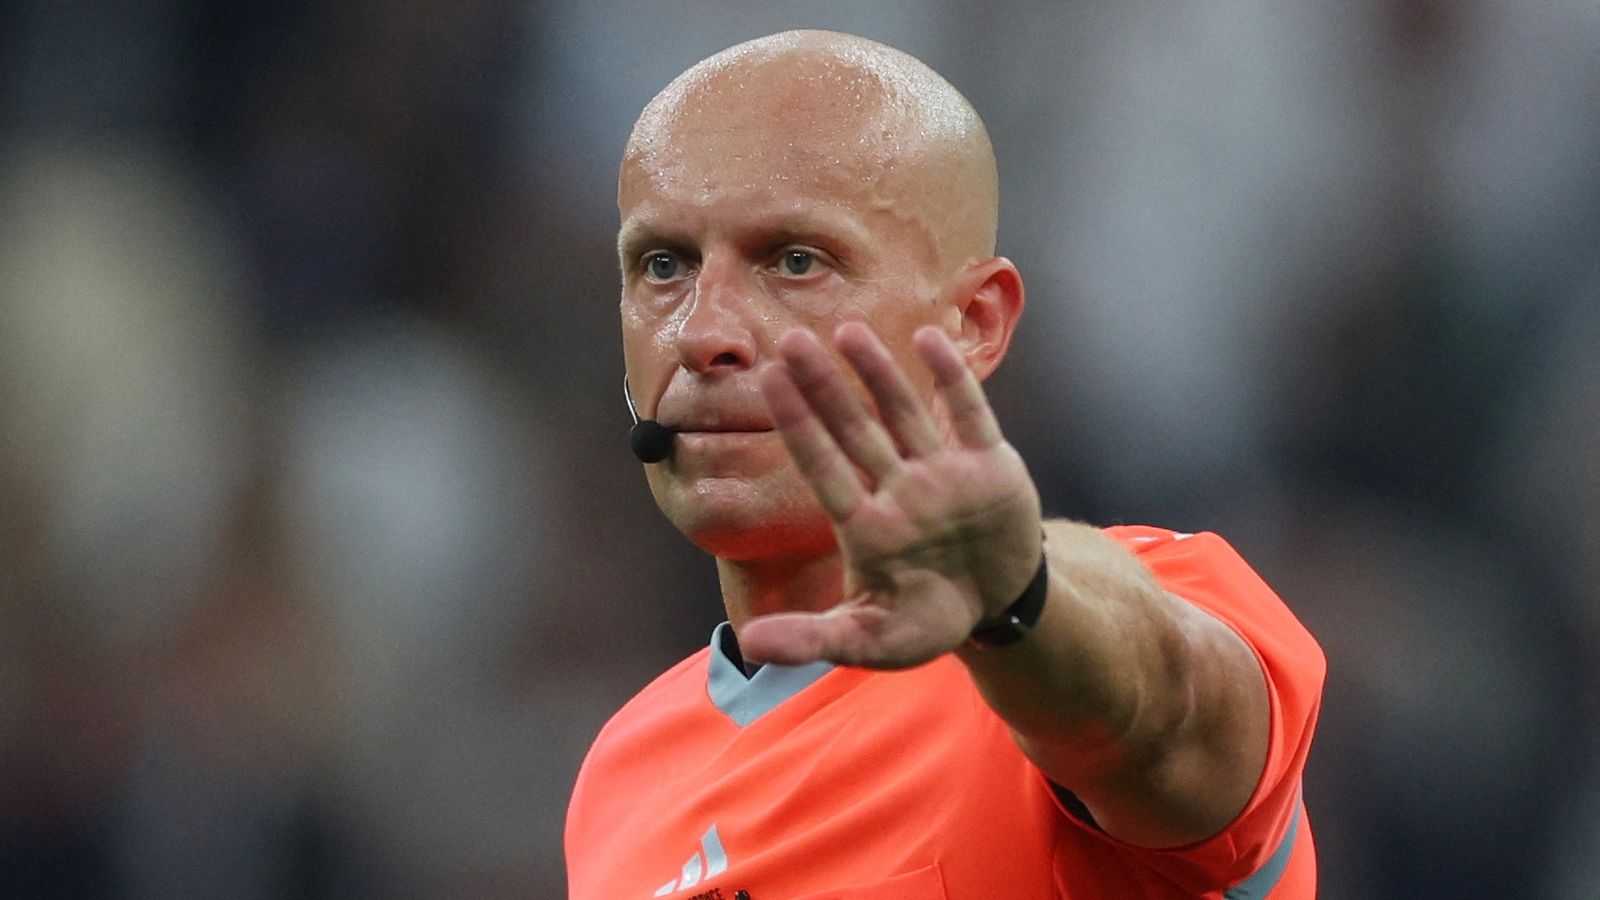 Champions League final: Szymon Marciniak to stay as referee after apologising for attending event linked to far-right